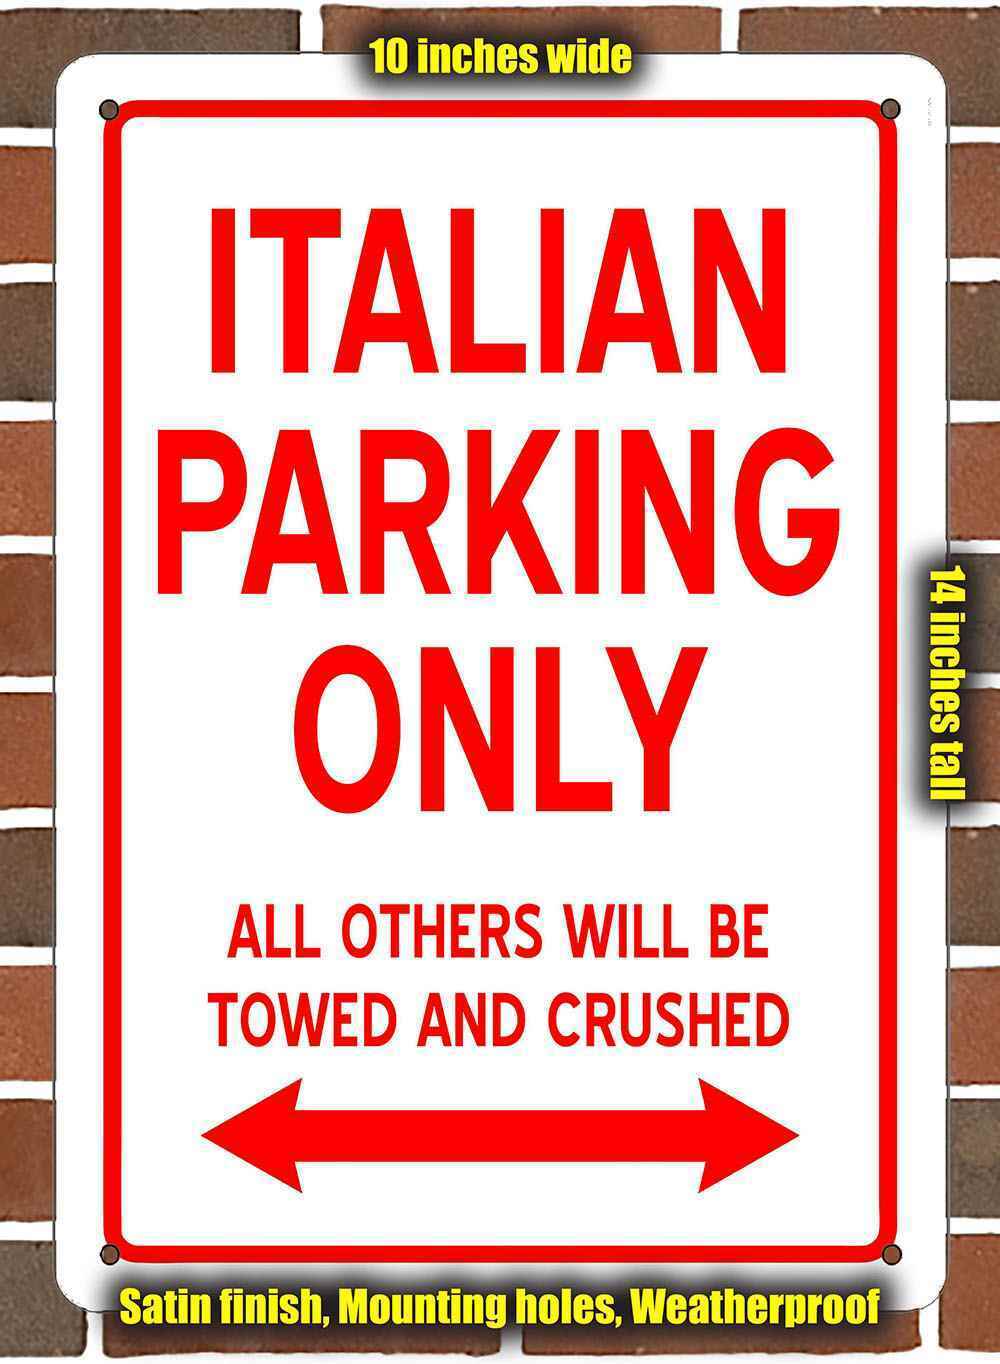 Metal Sign - ITALIAN PARKING ONLY- 10x14 inches